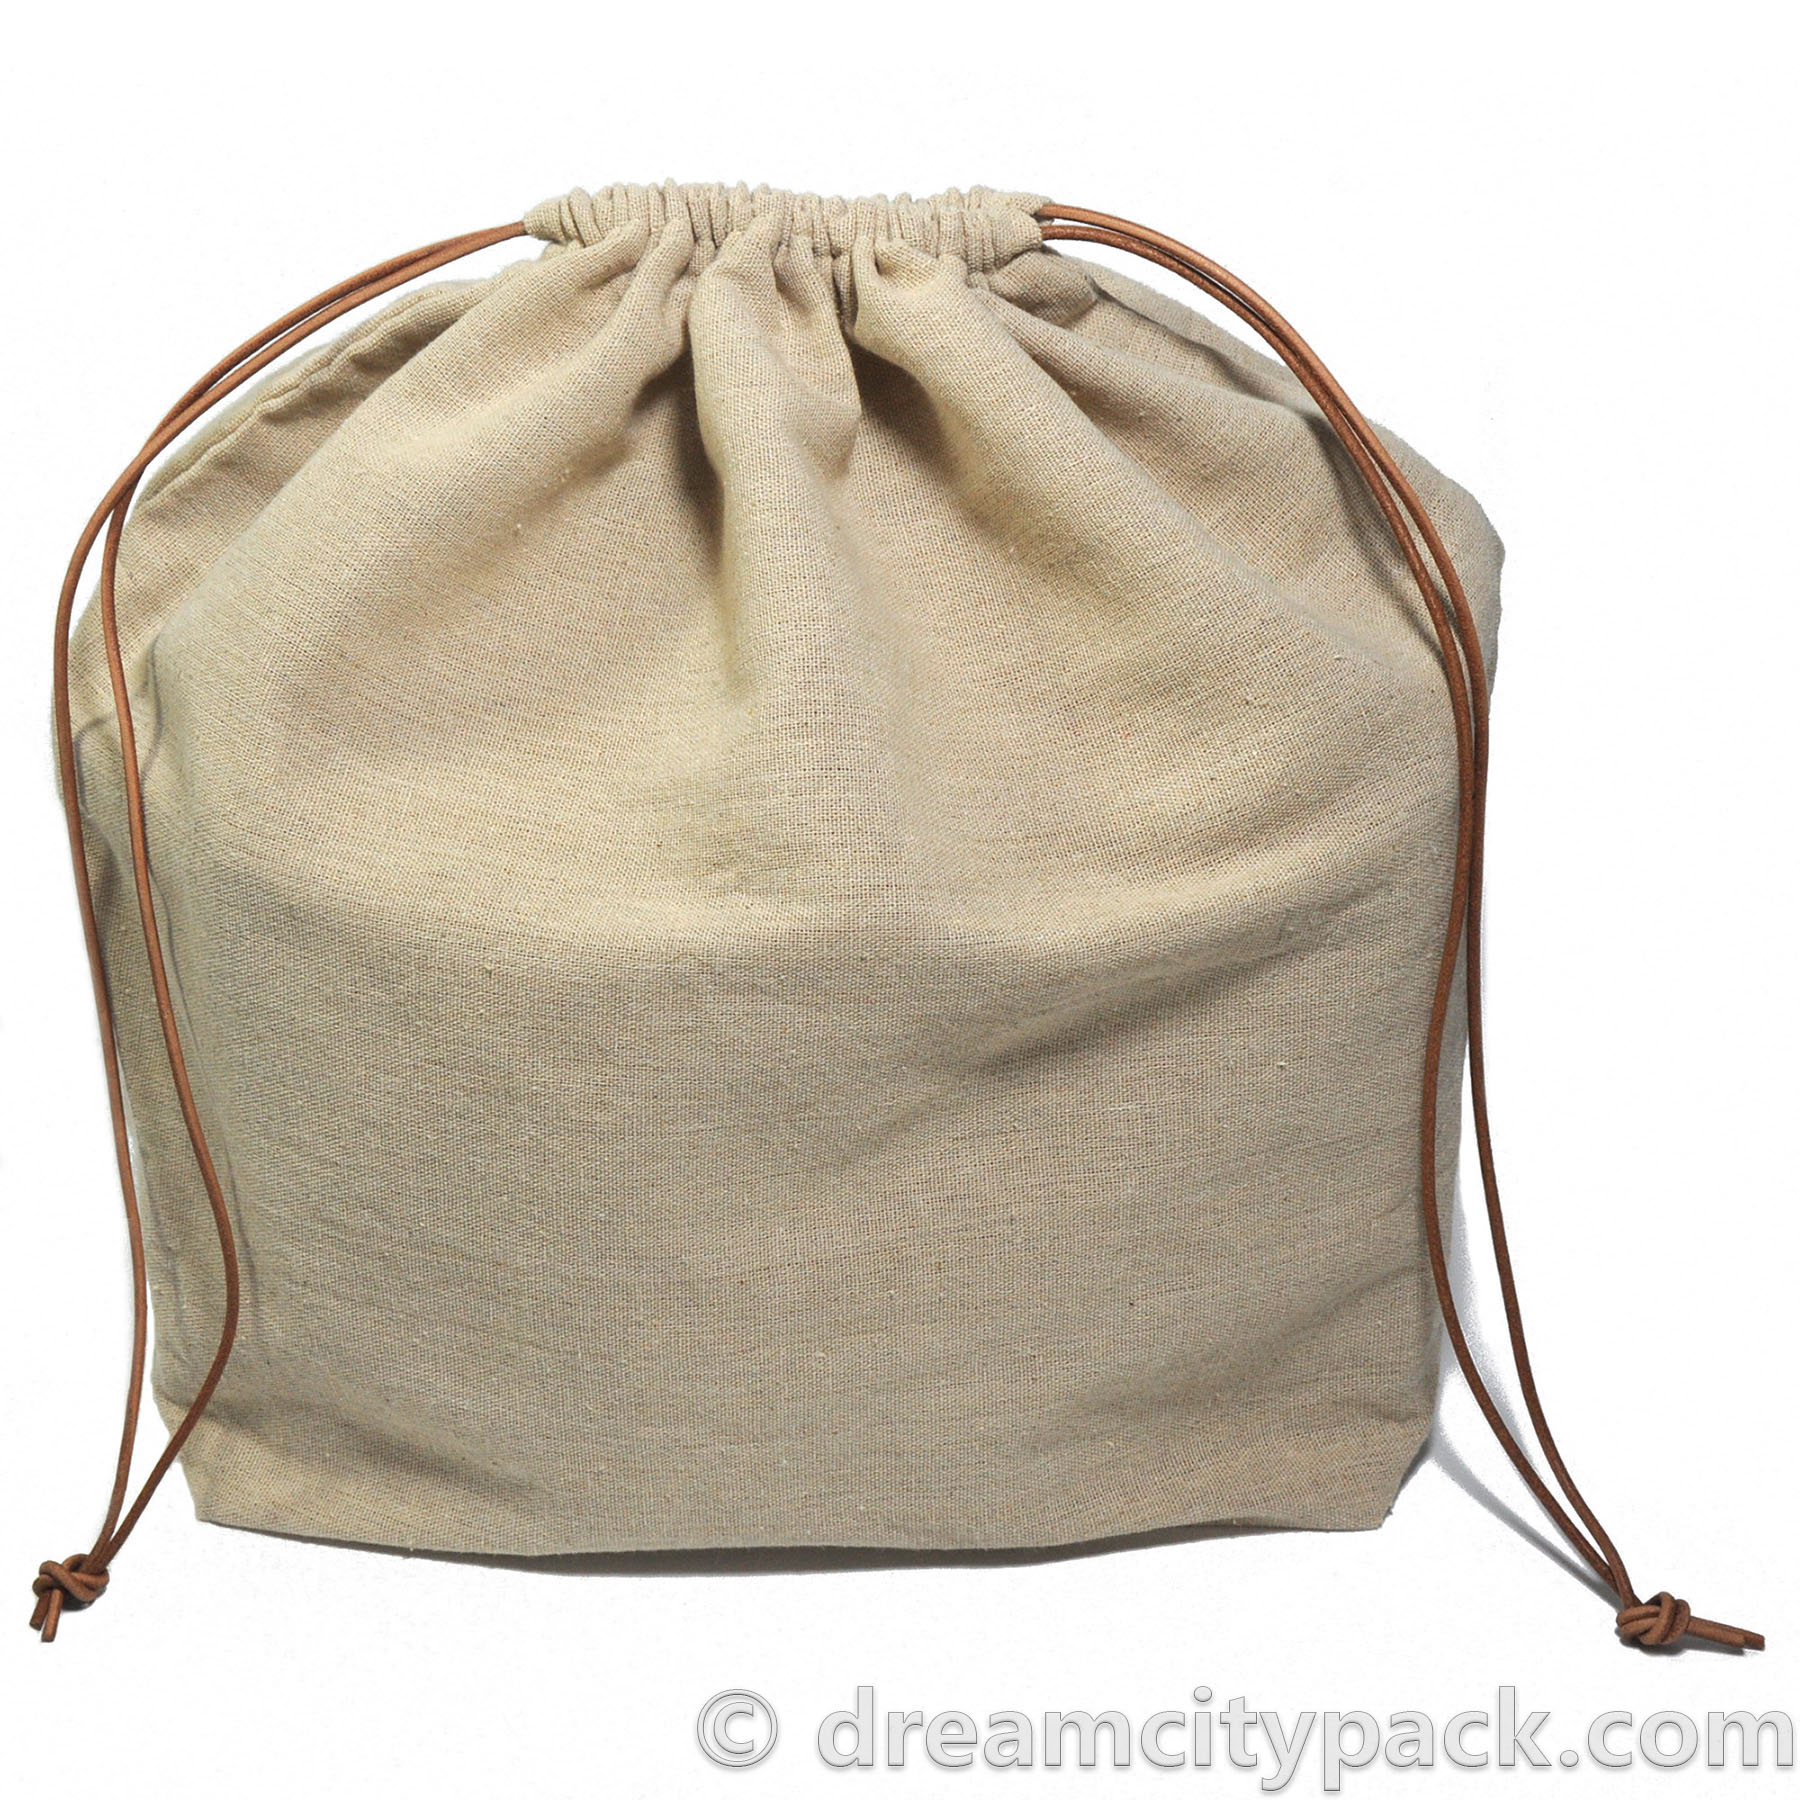 Drawstring Dust Bag for Handbags (Available in 3 Sizes)